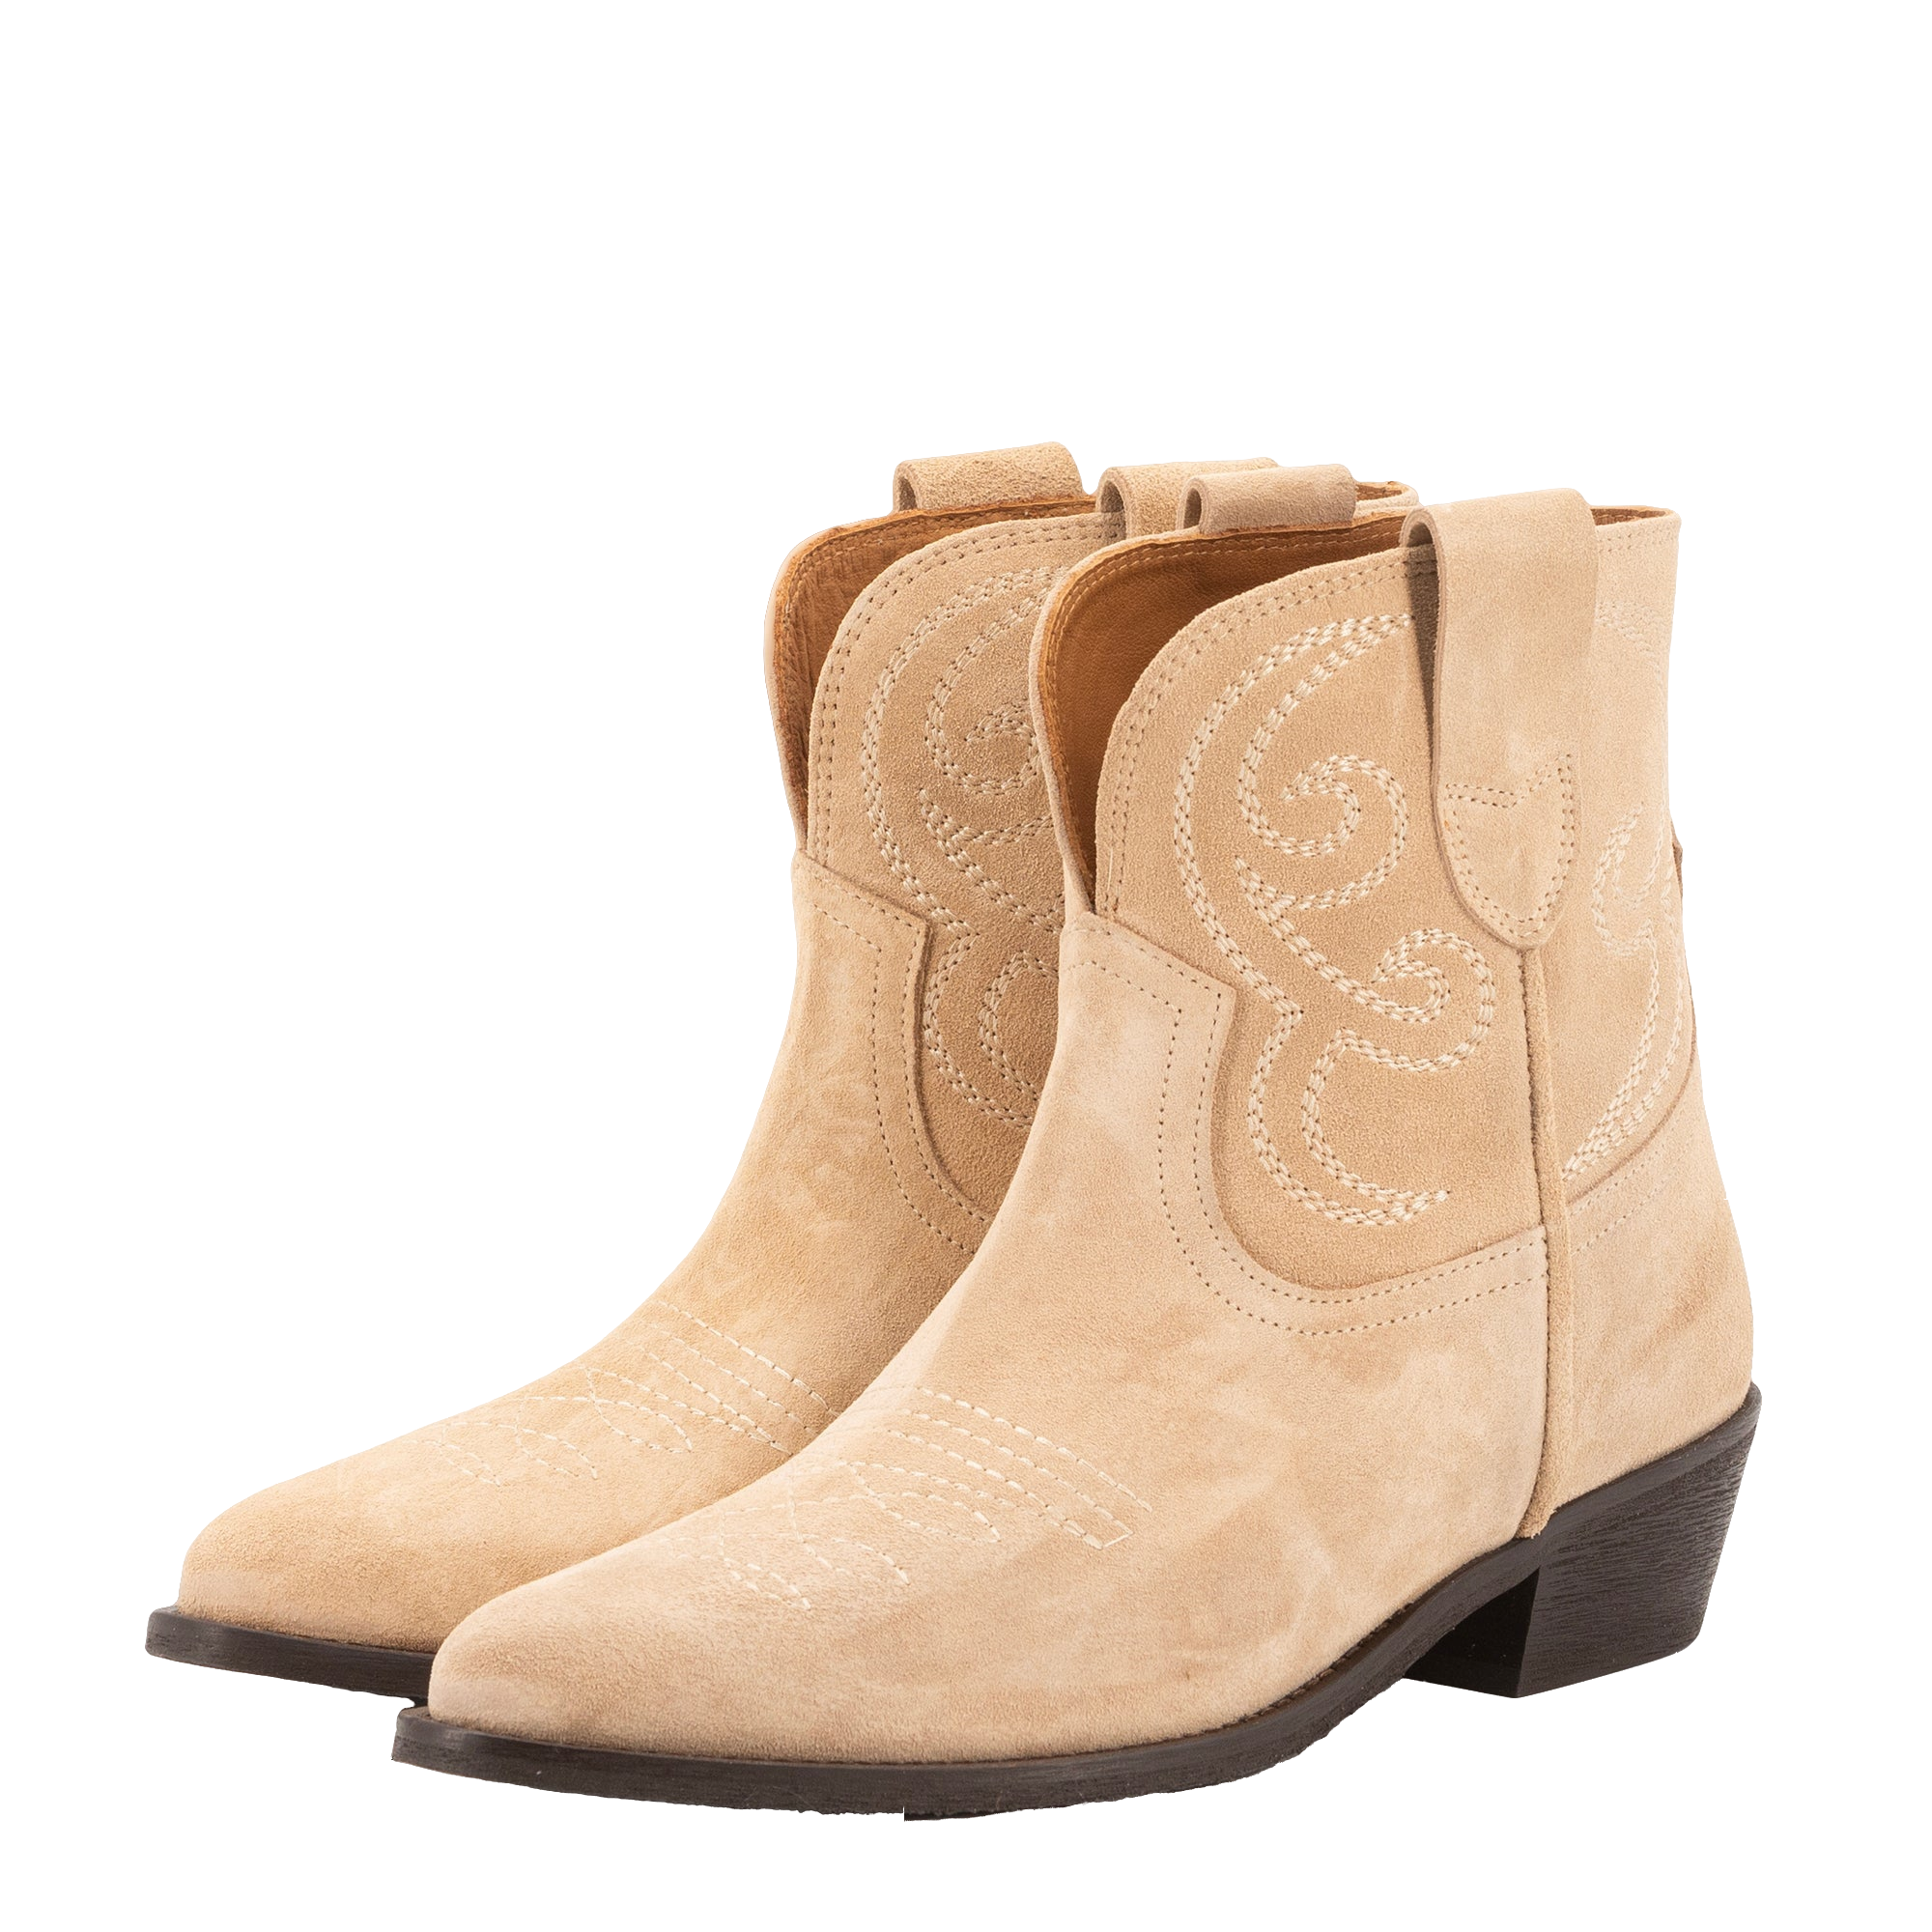 Toral Puja Sand Ankle Boots In Beige